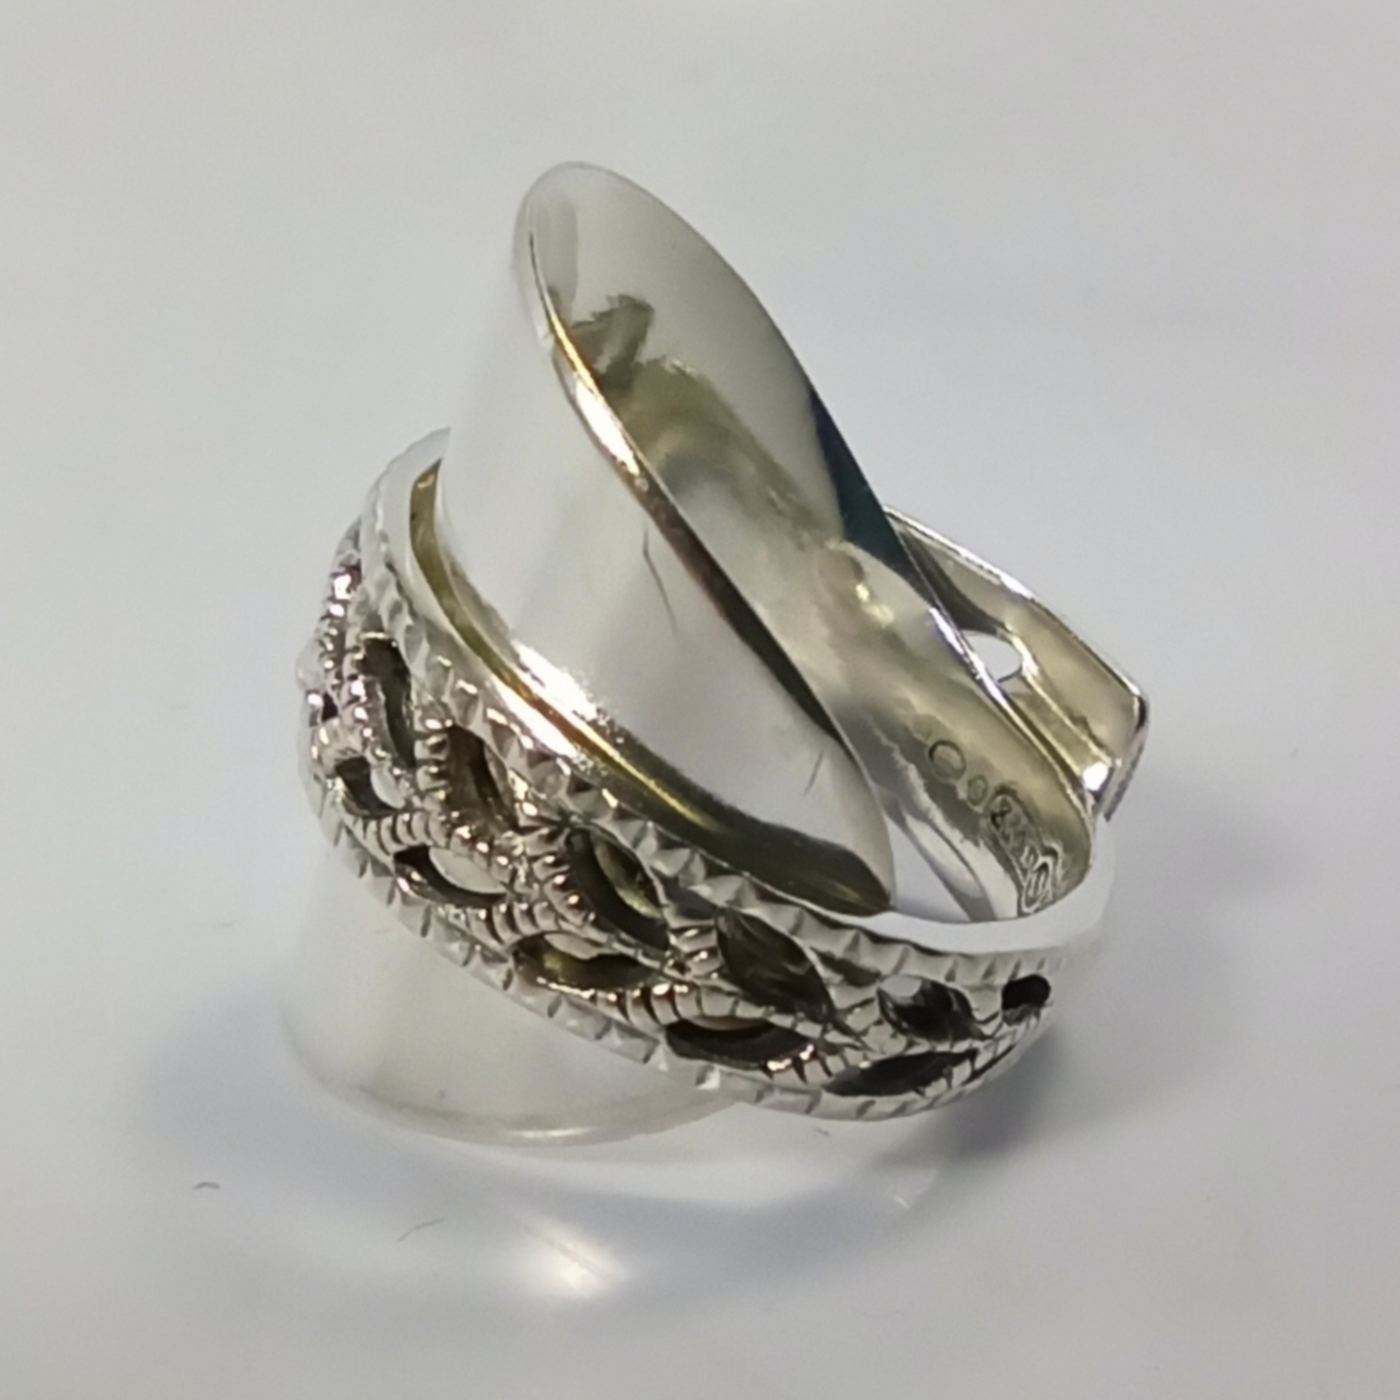 Spoon ring made from a whole solid silver vintage spoon